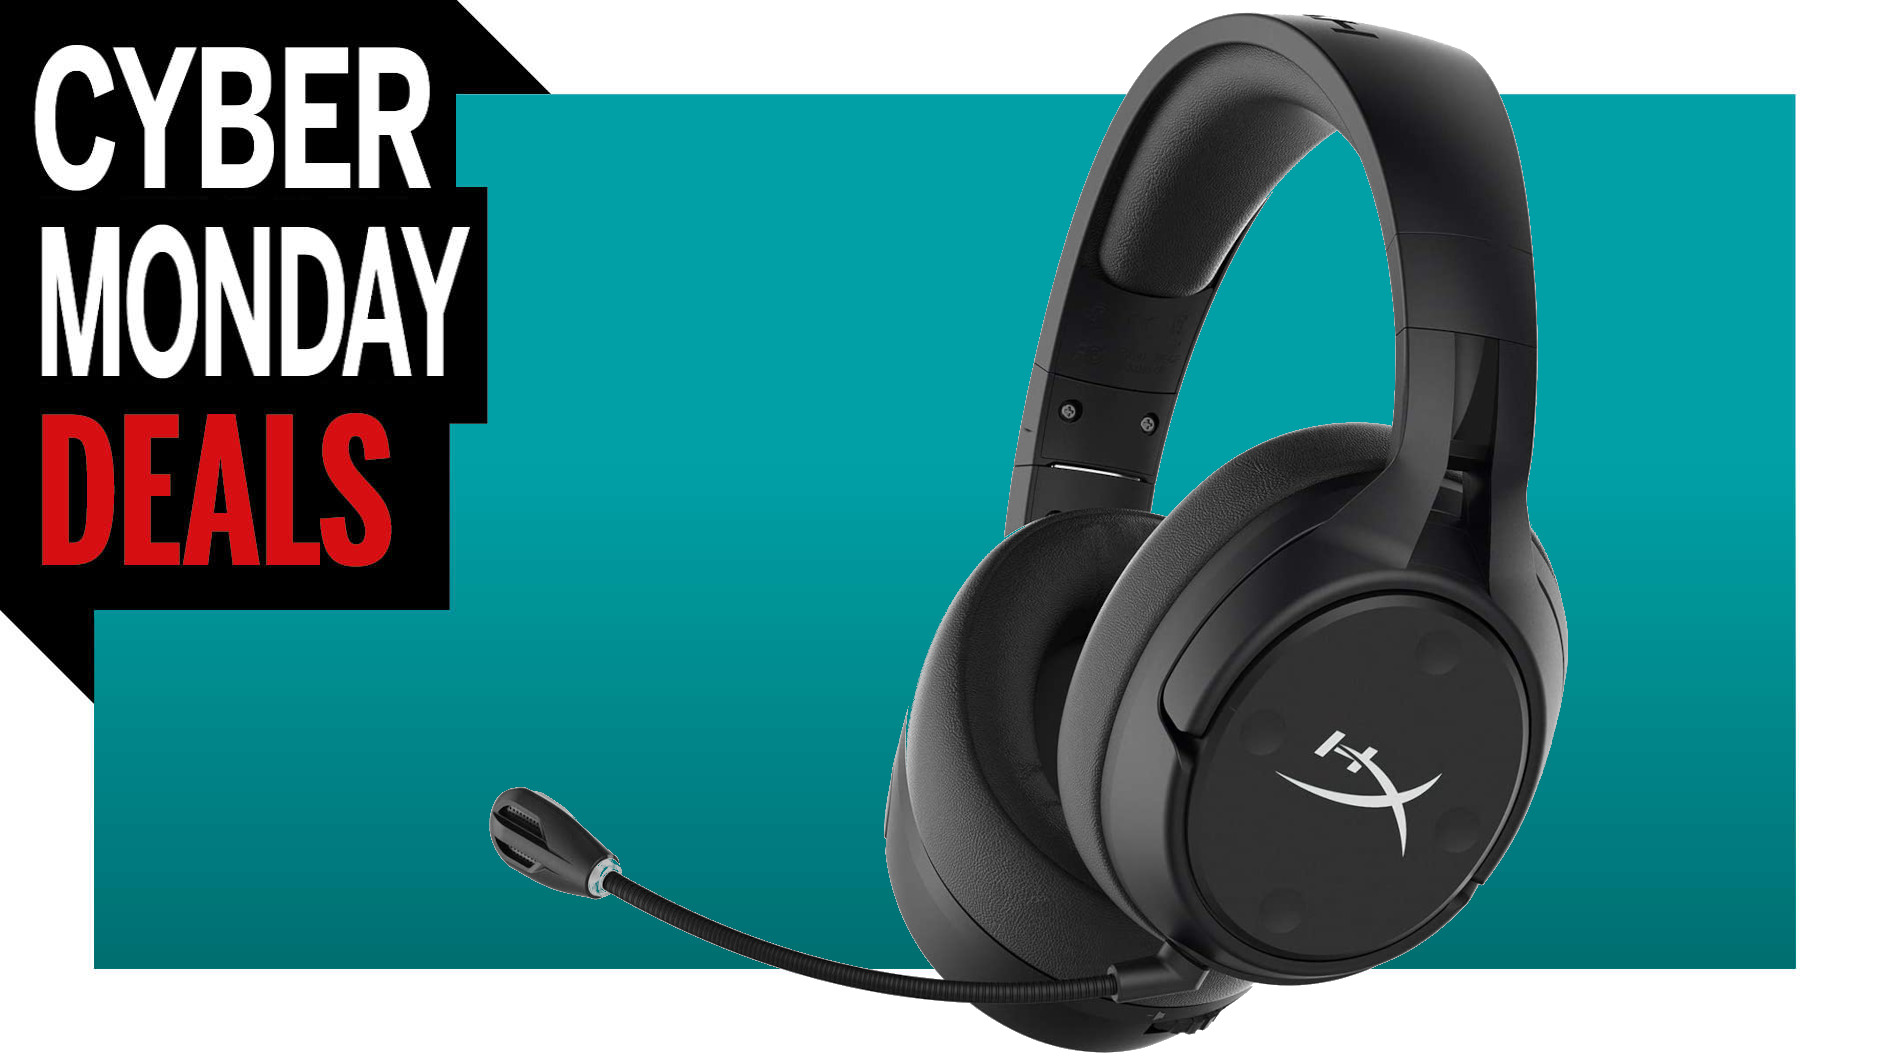  Get the HyperX Cloud Flight S wireless gaming headset for an all-time low price of $120 